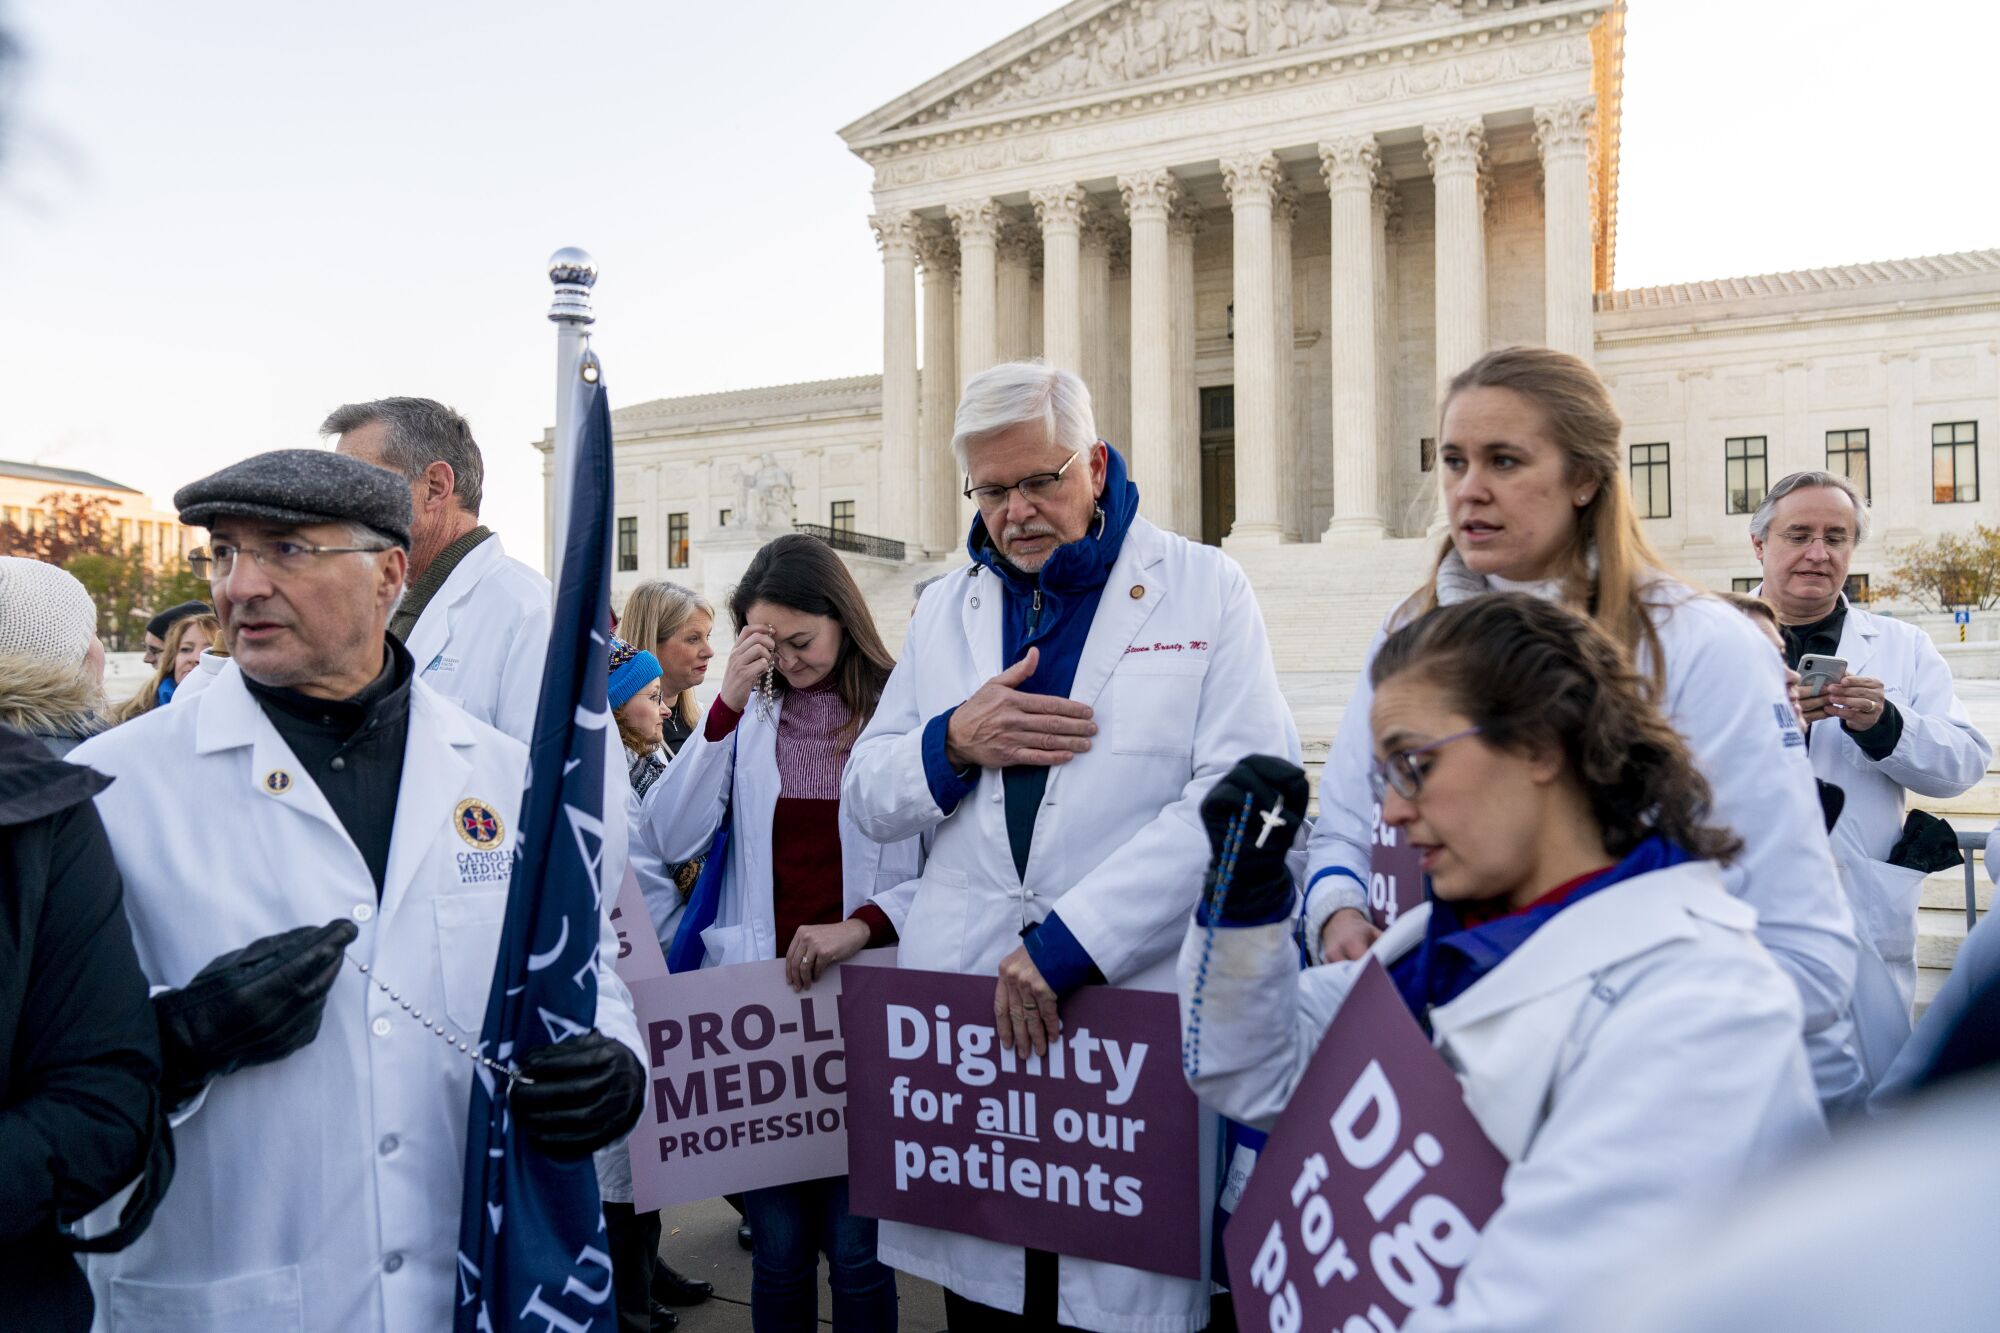 Anti-abortion protesters wearing doctor uniforms pray in front of the U.S. Supreme Court.